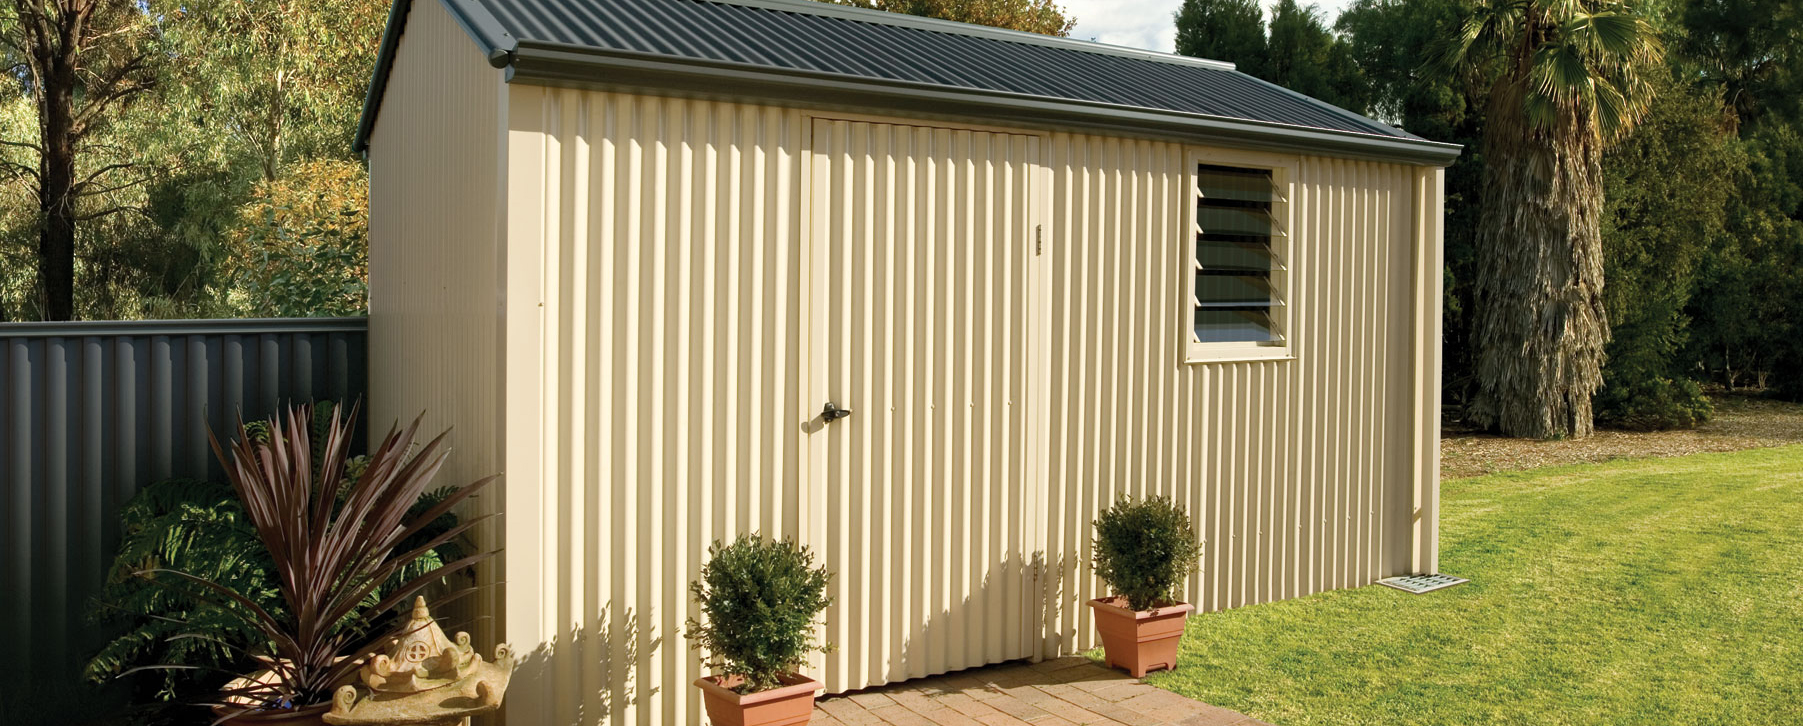 garden sheds perth aussie outdoor sheds stratco sheds